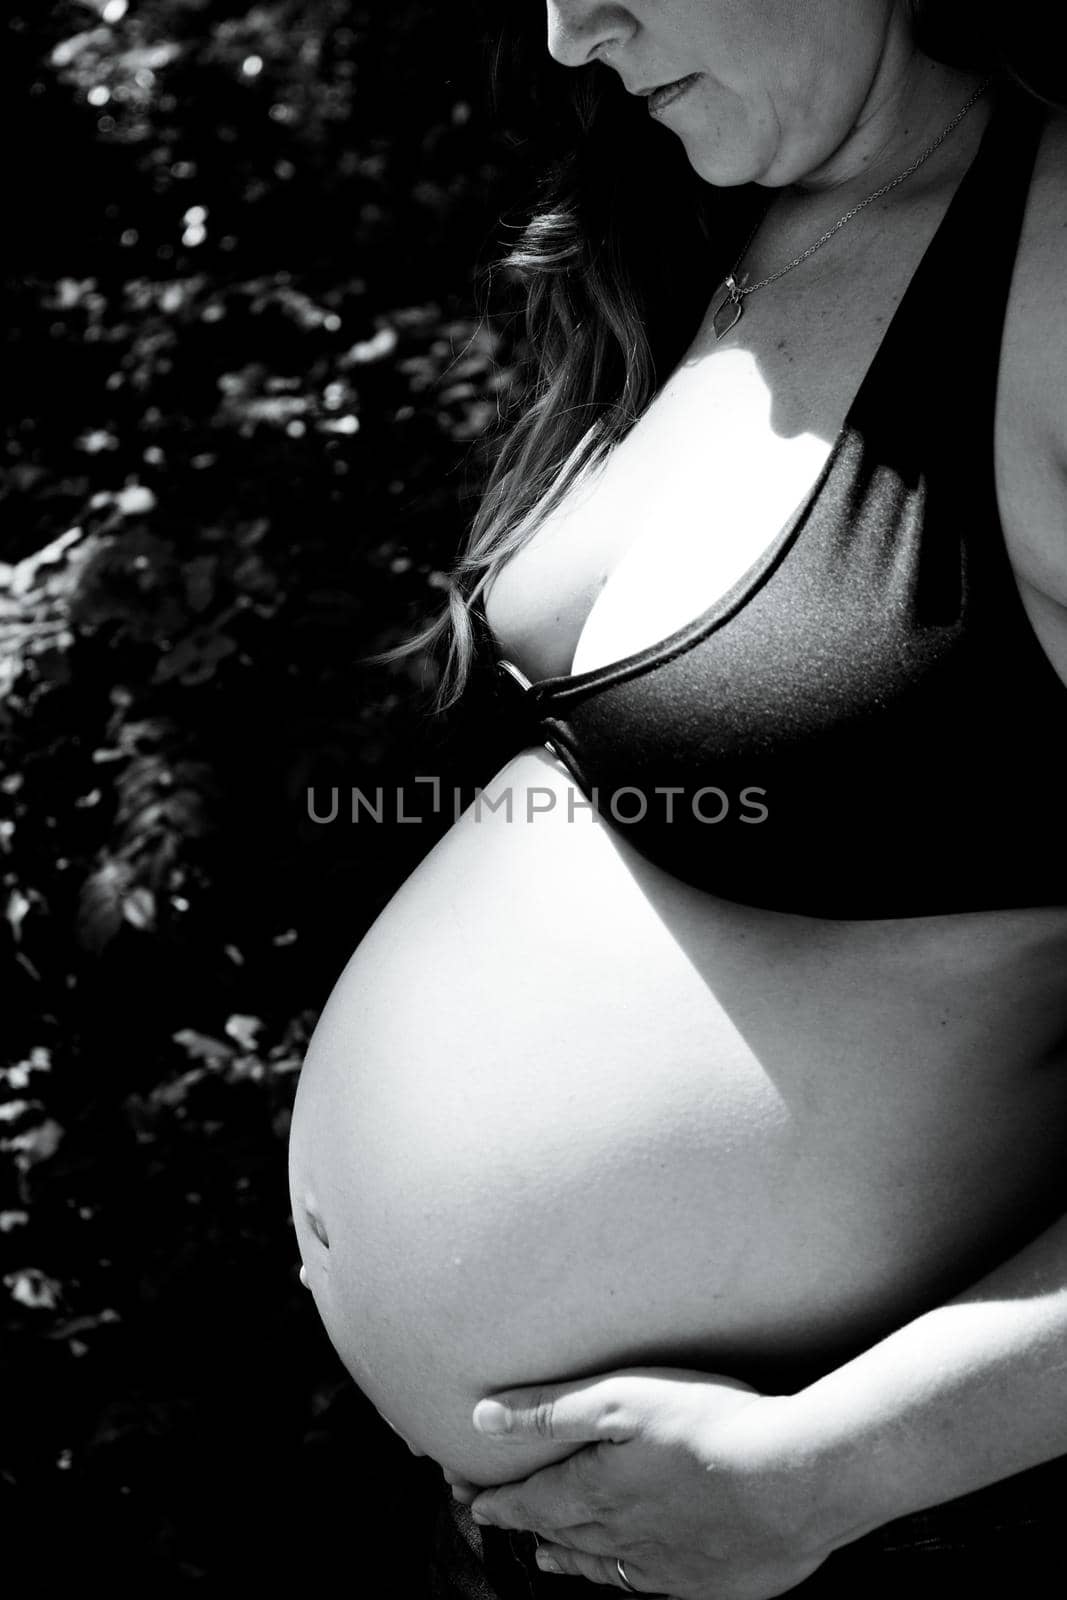 Seven month pregnant woman in a park dressed in jeans